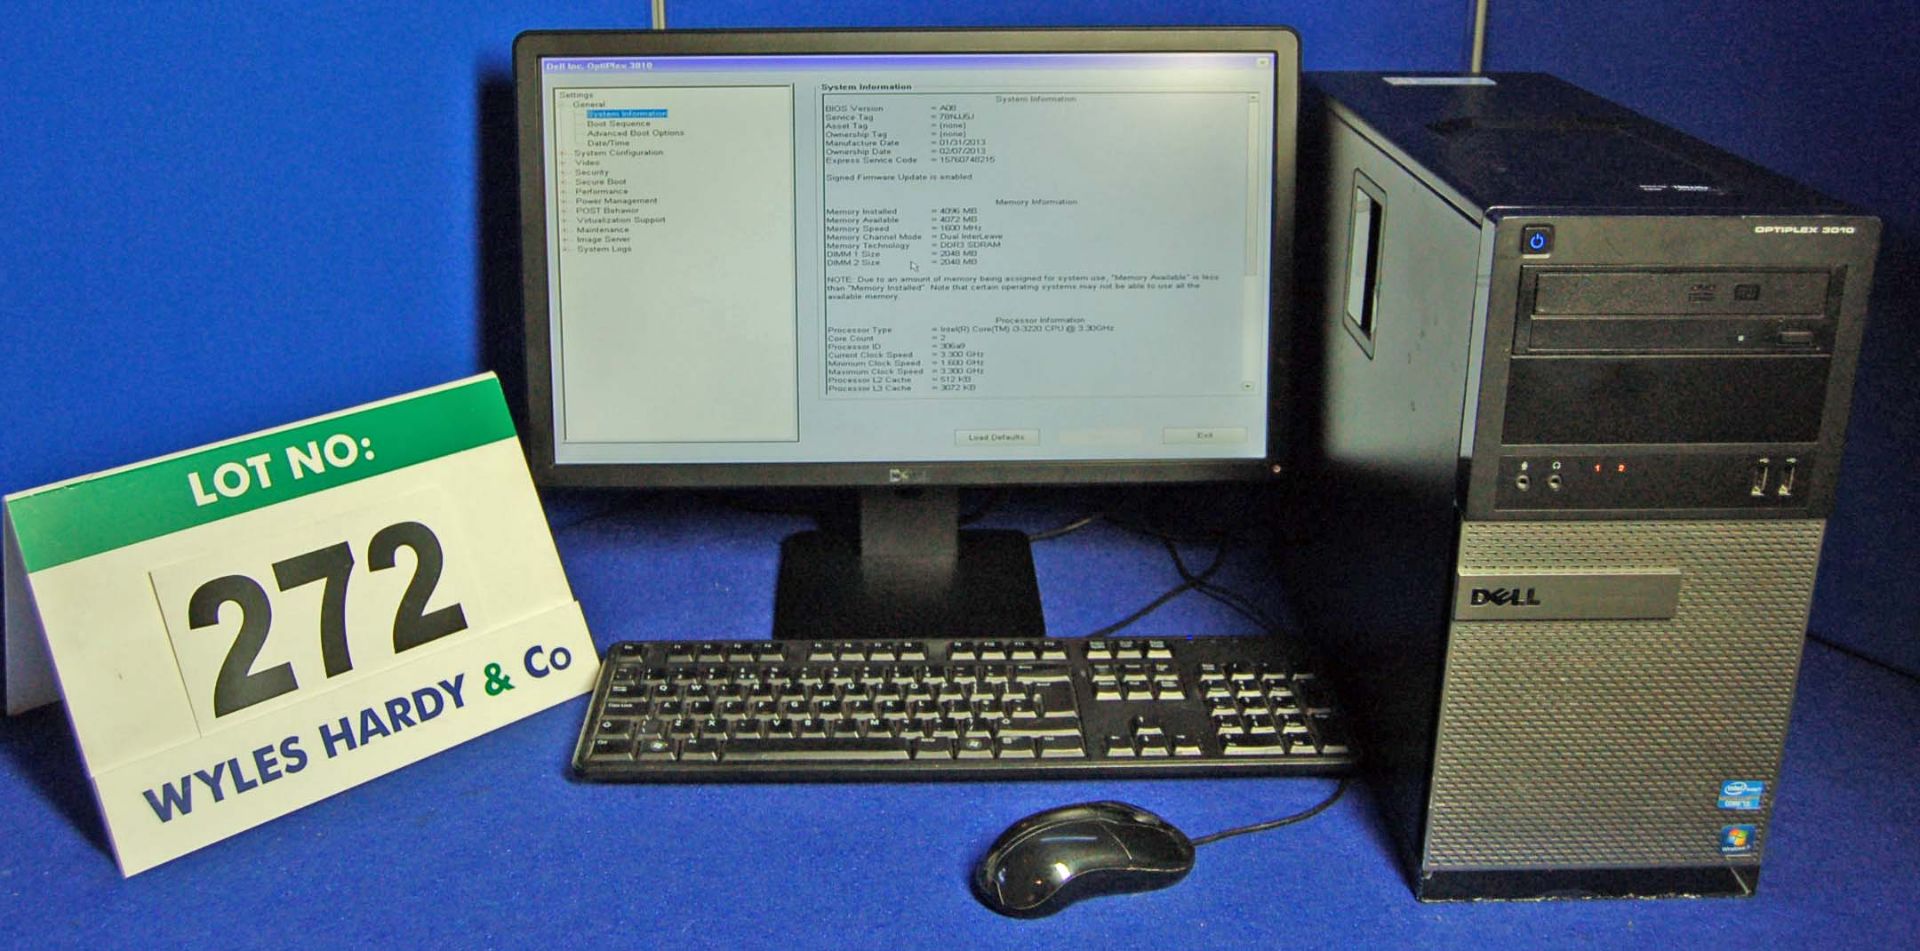 A DELL OptiPlex 3010 INTEL i3 3.3Ghz Minitower Personal Computer with 250GB Hard Disc Drive, 4.0GB